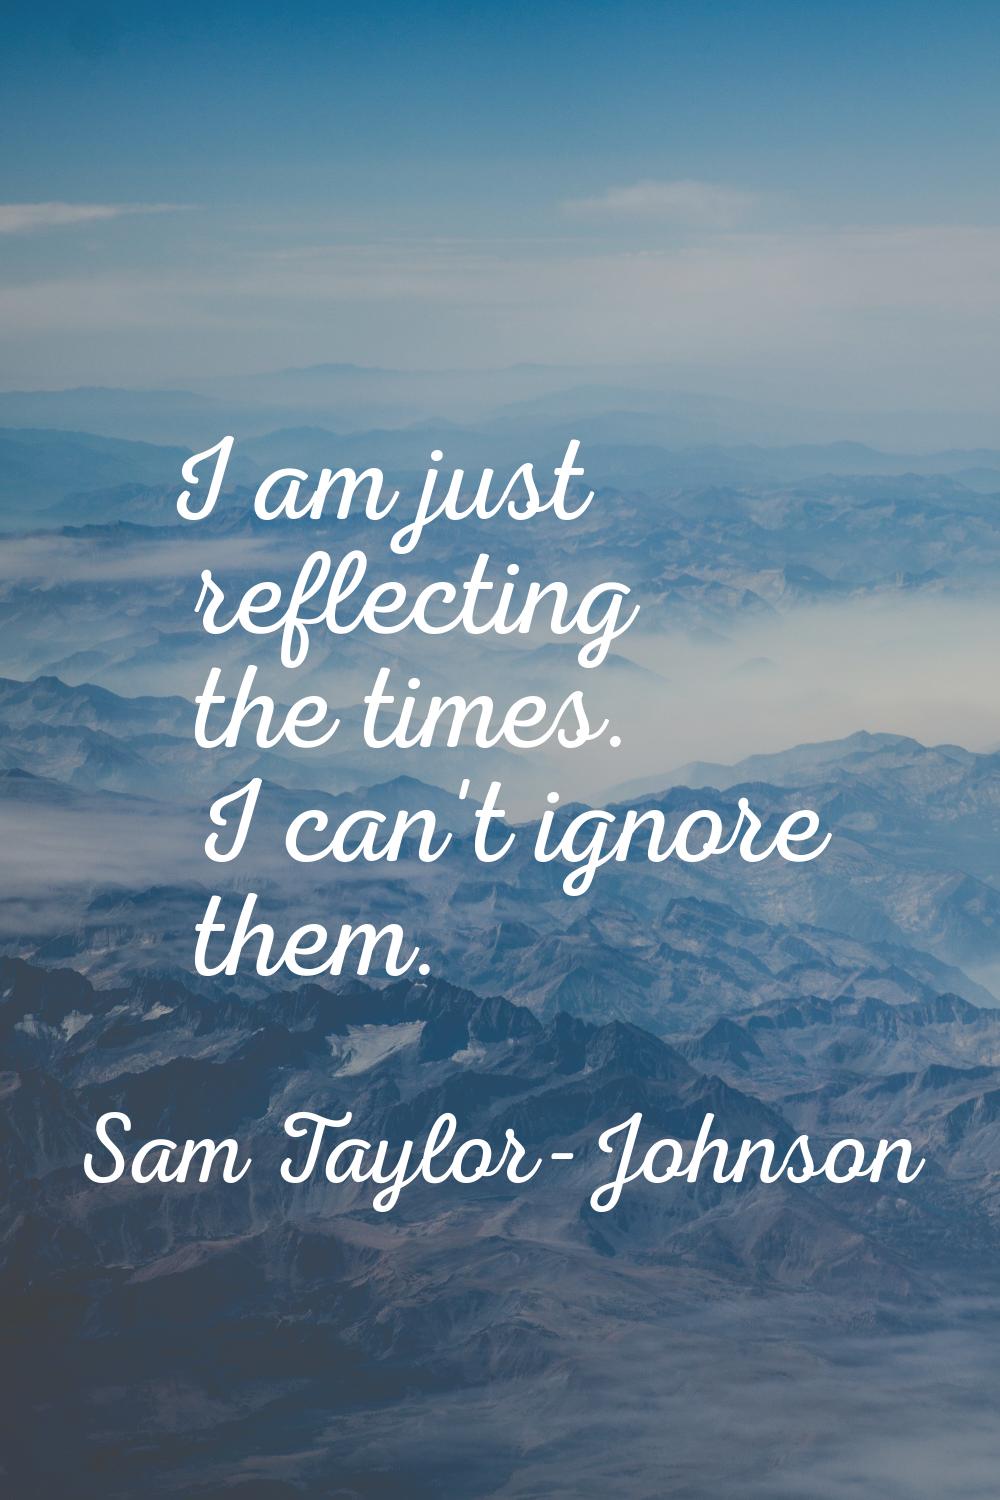 I am just reflecting the times. I can't ignore them.